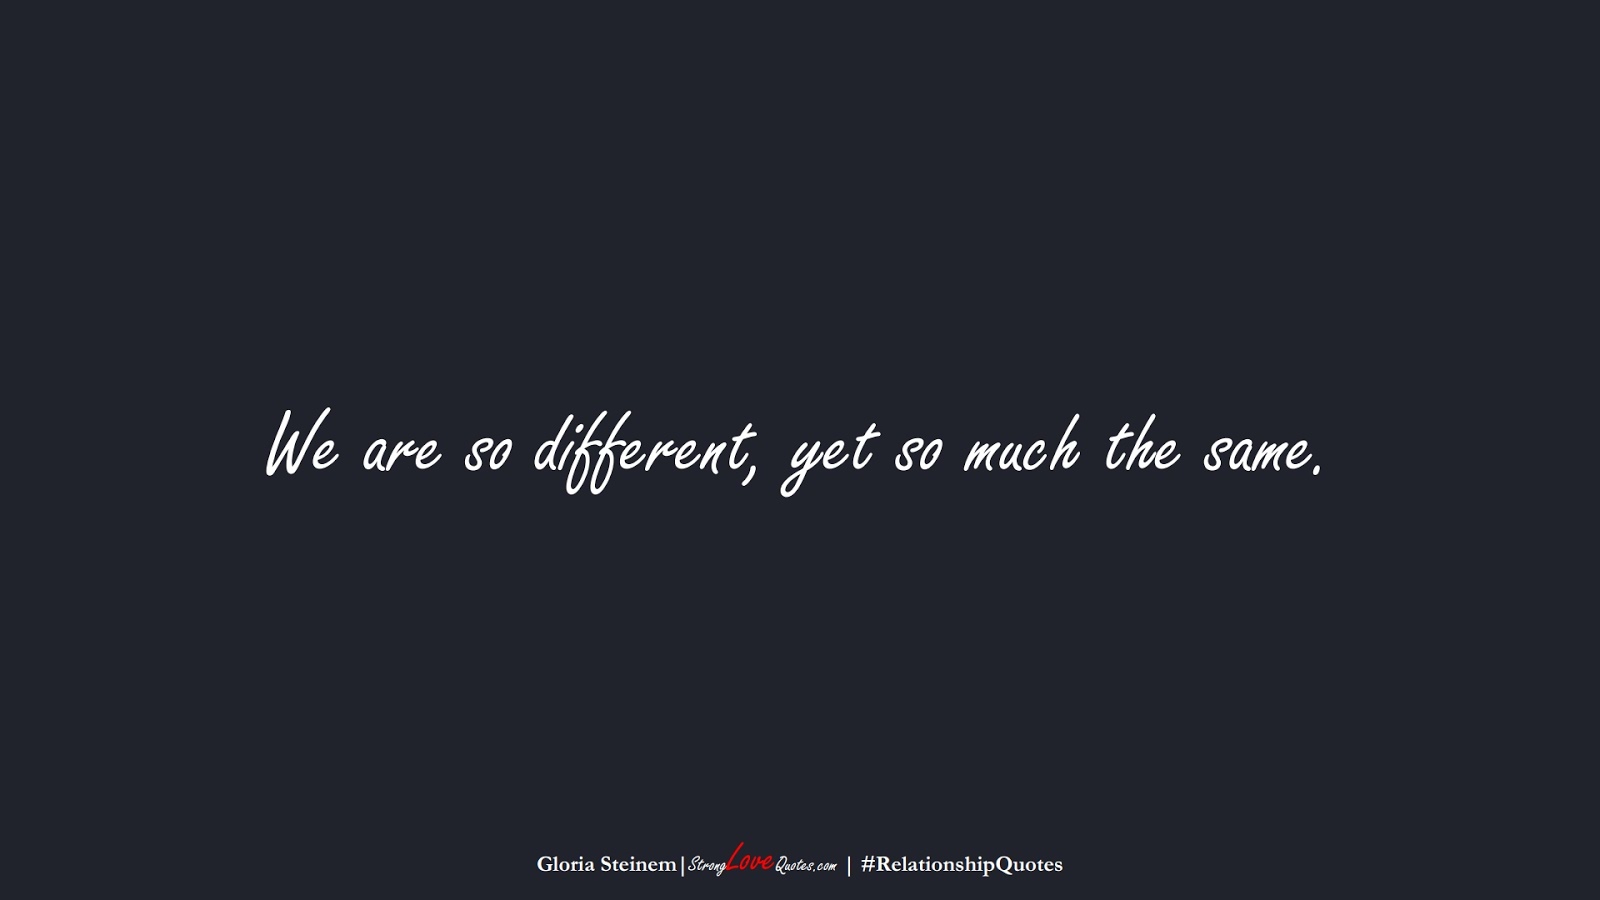 We are so different, yet so much the same. (Gloria Steinem);  #RelationshipQuotes